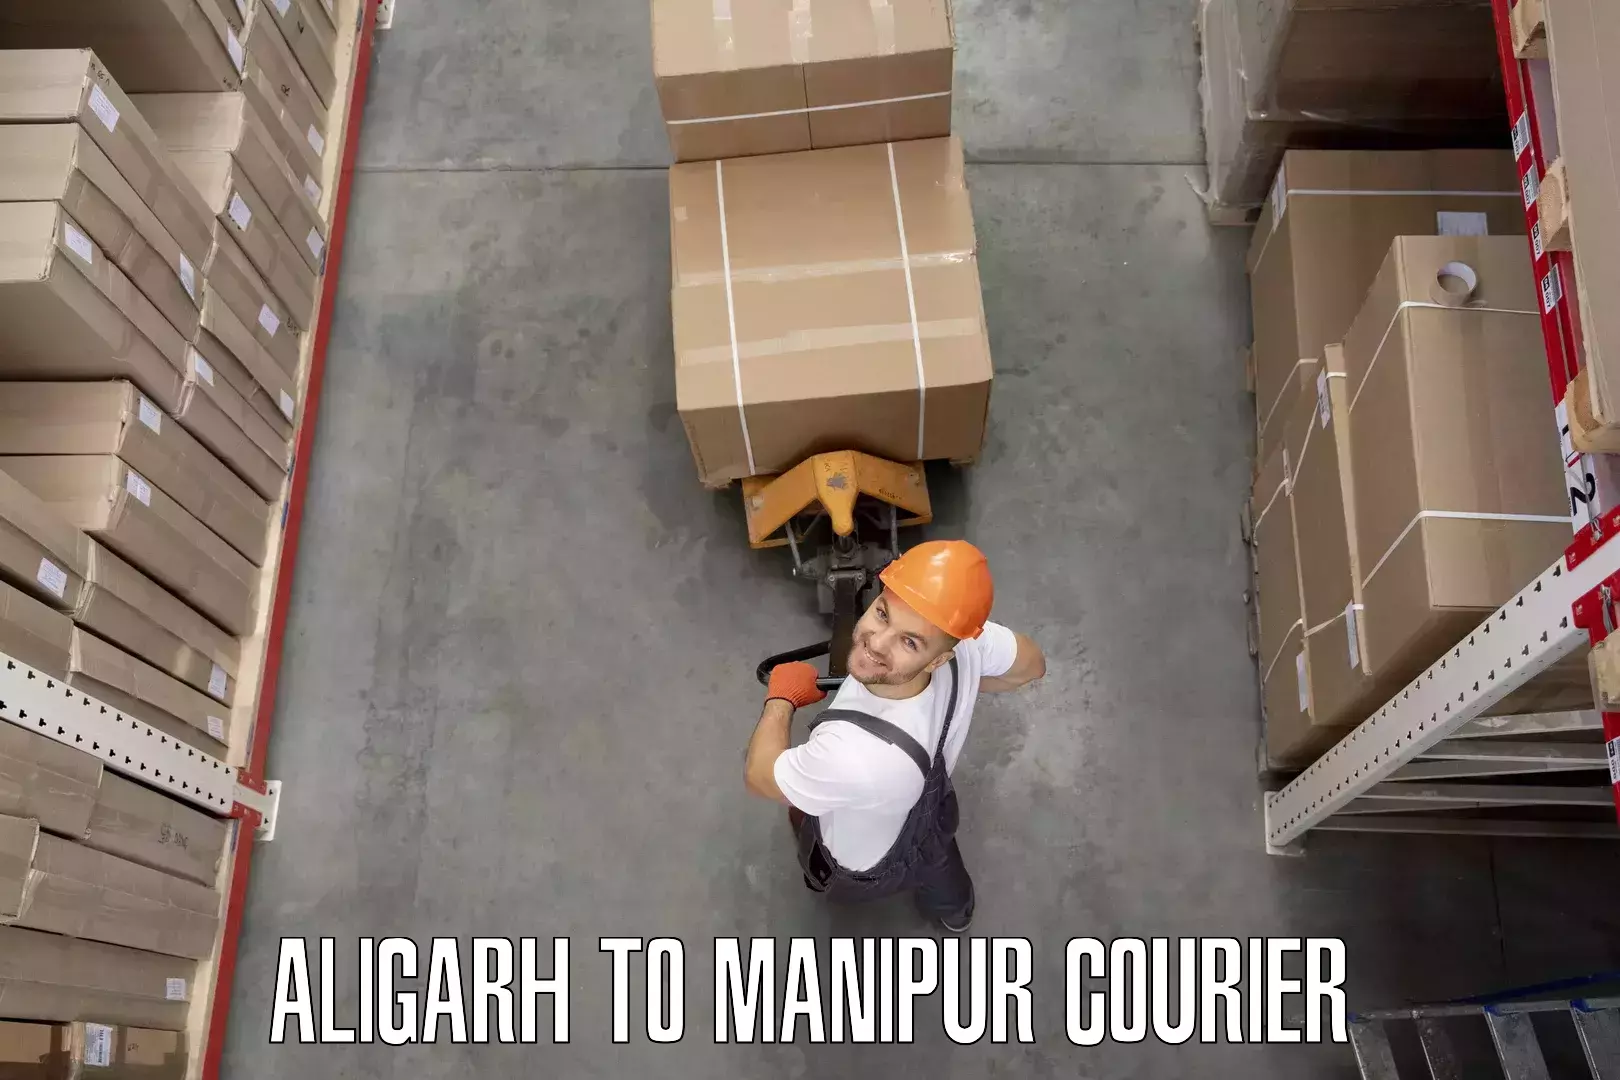 Furniture delivery service Aligarh to Moirang